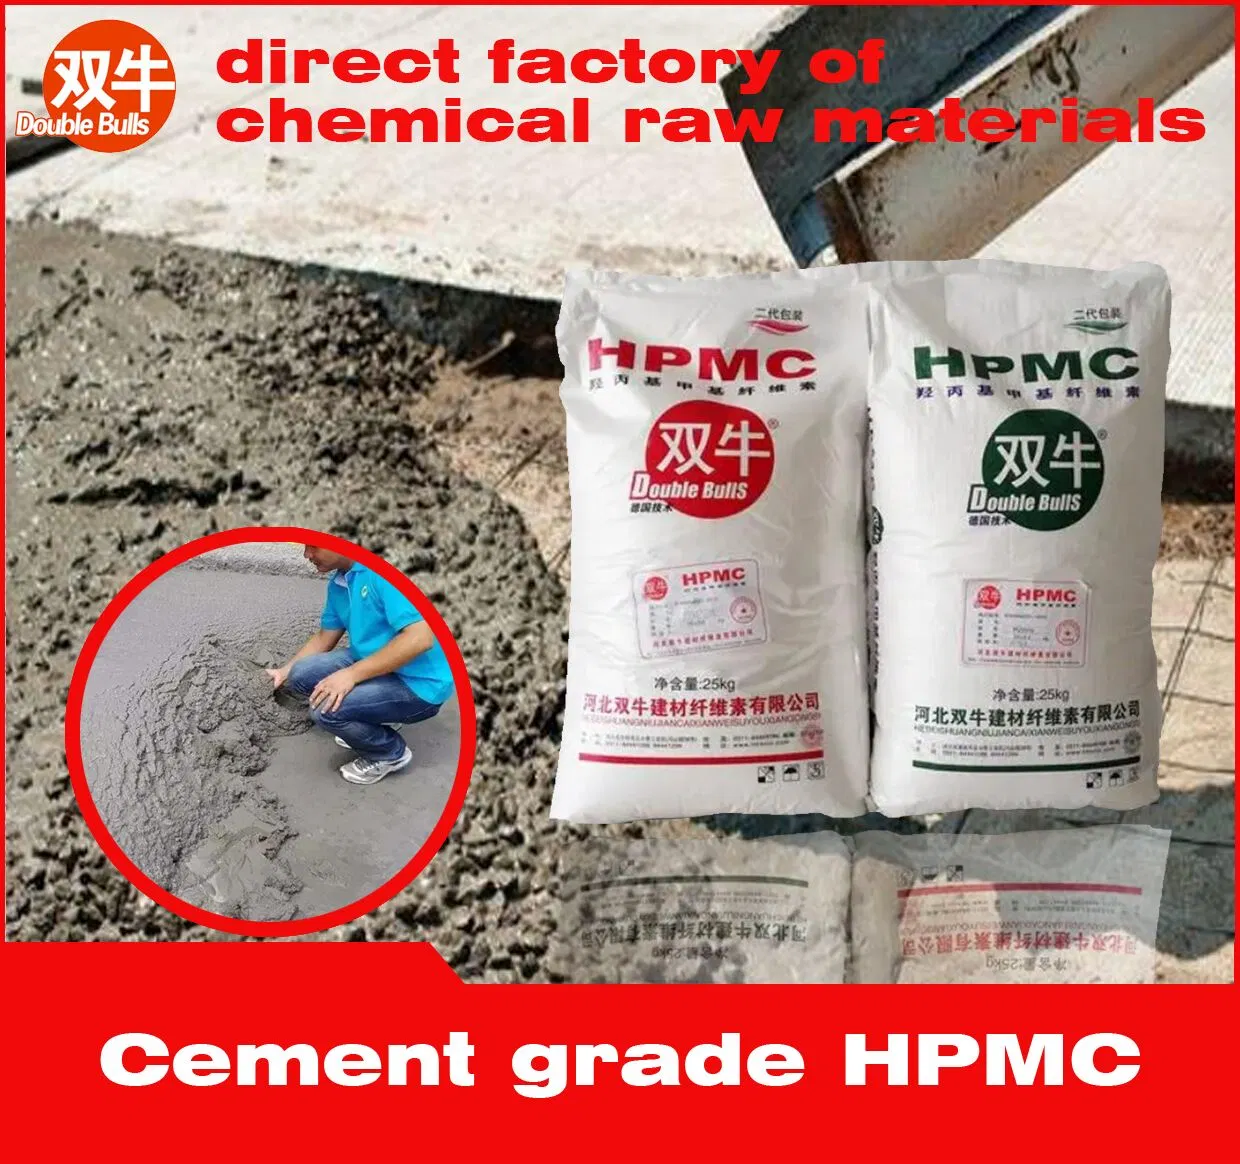 Hydroxy Propyl Methyl Cellulose/HPMC as Chemical Additives in Mortar, Cement Plaster, Putty, Tile Adhesive Big Plant